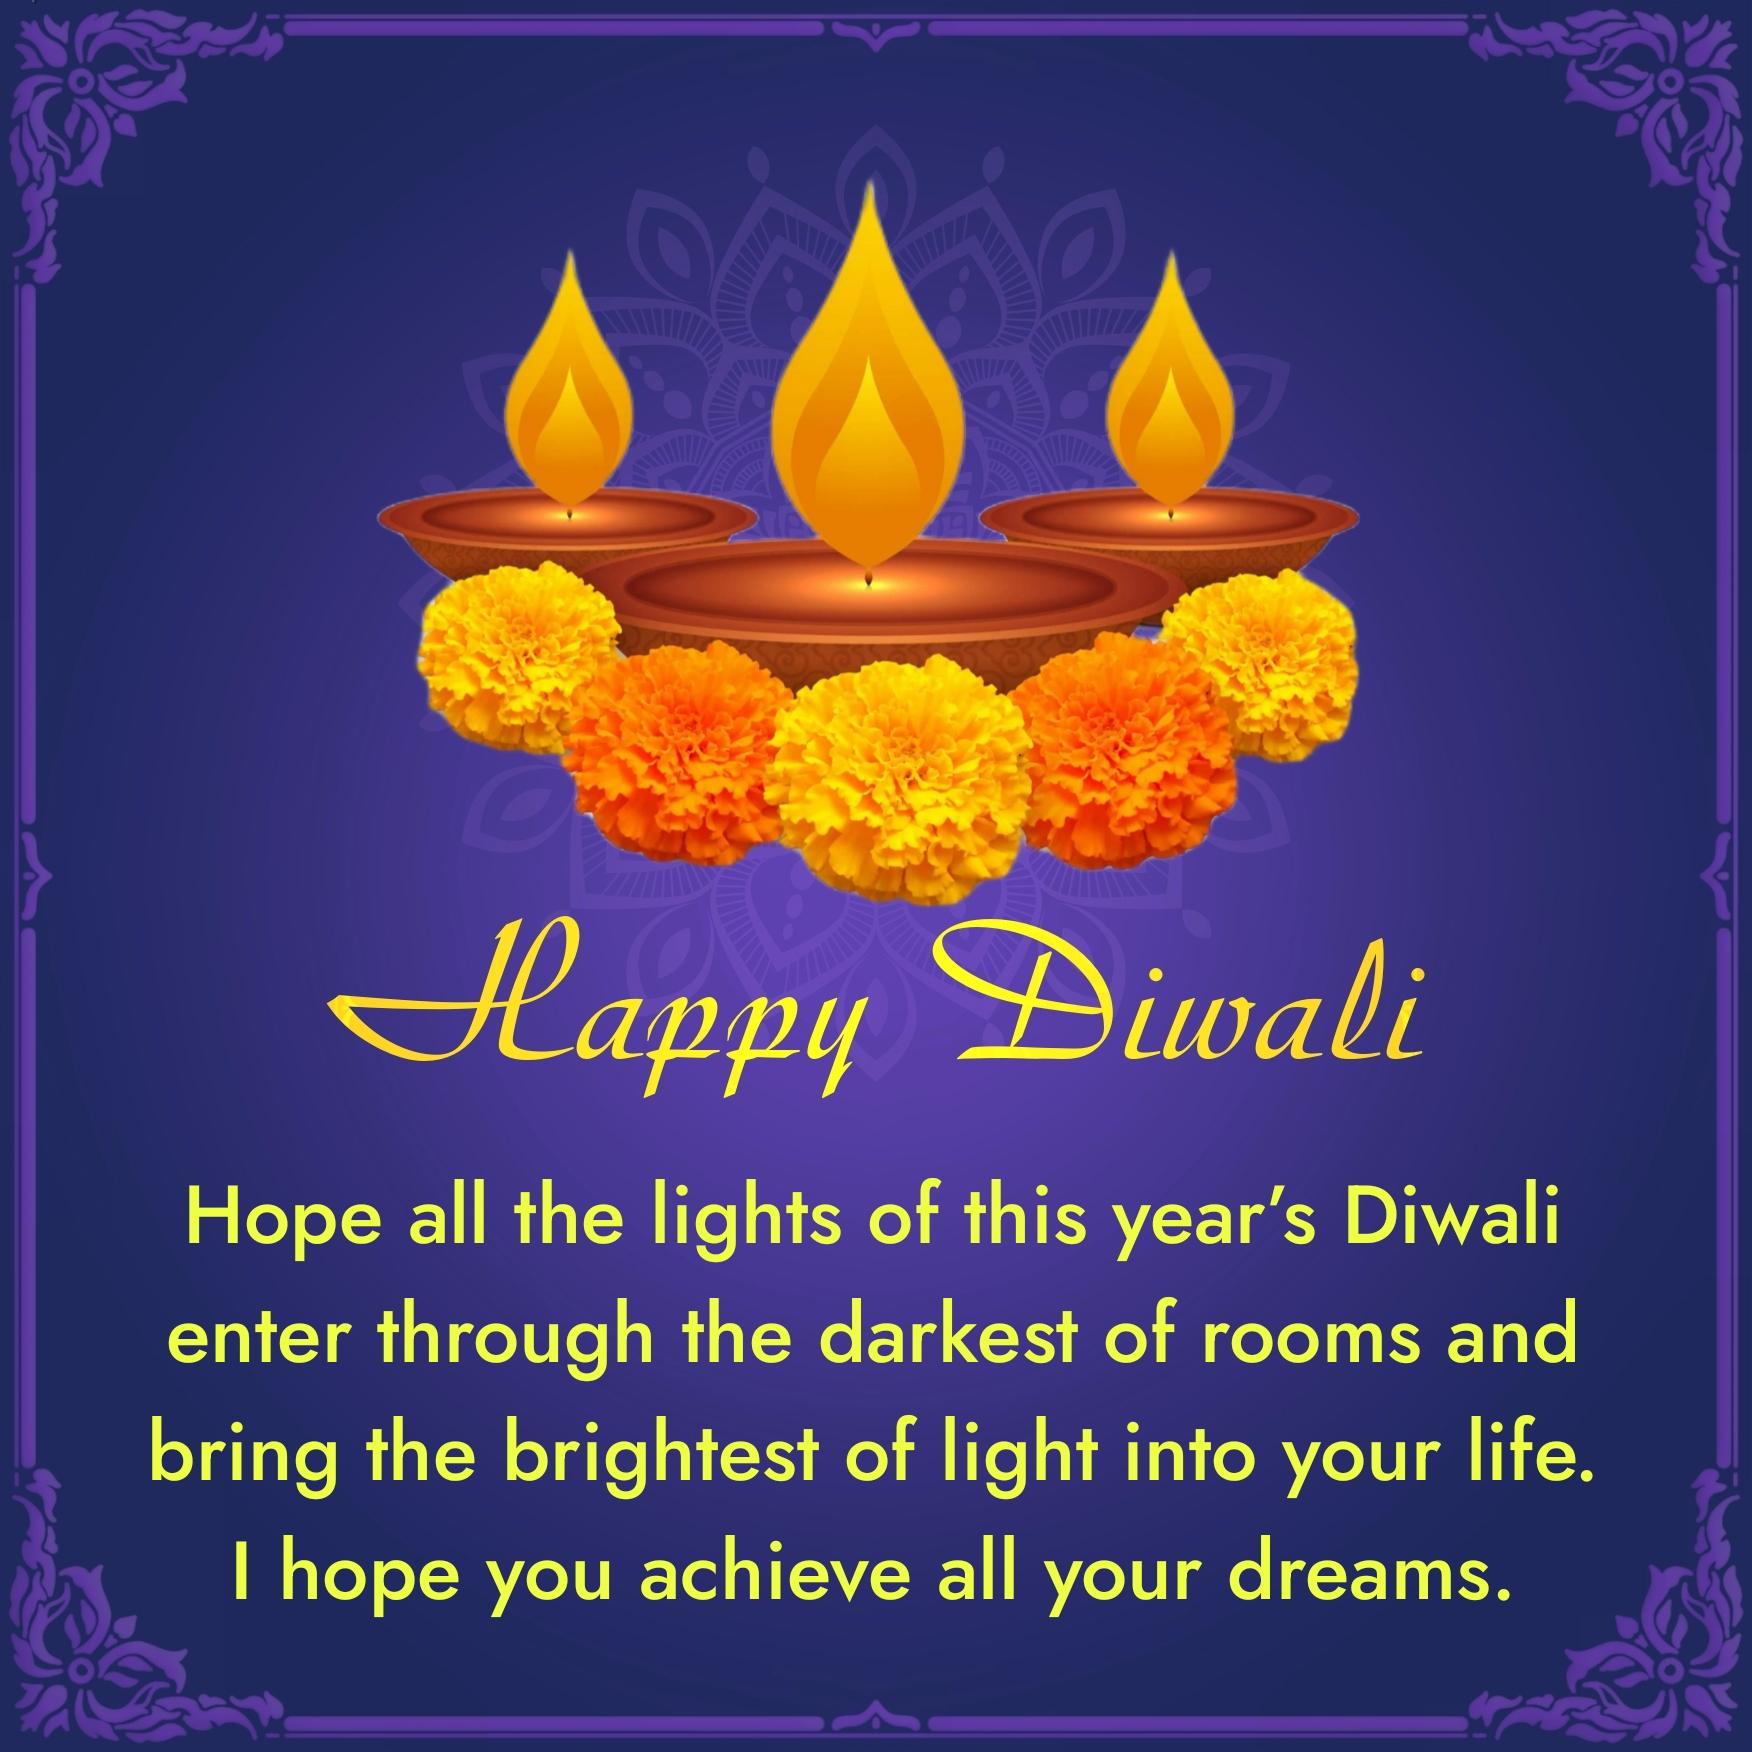 Hope all the lights of this years Diwali enter